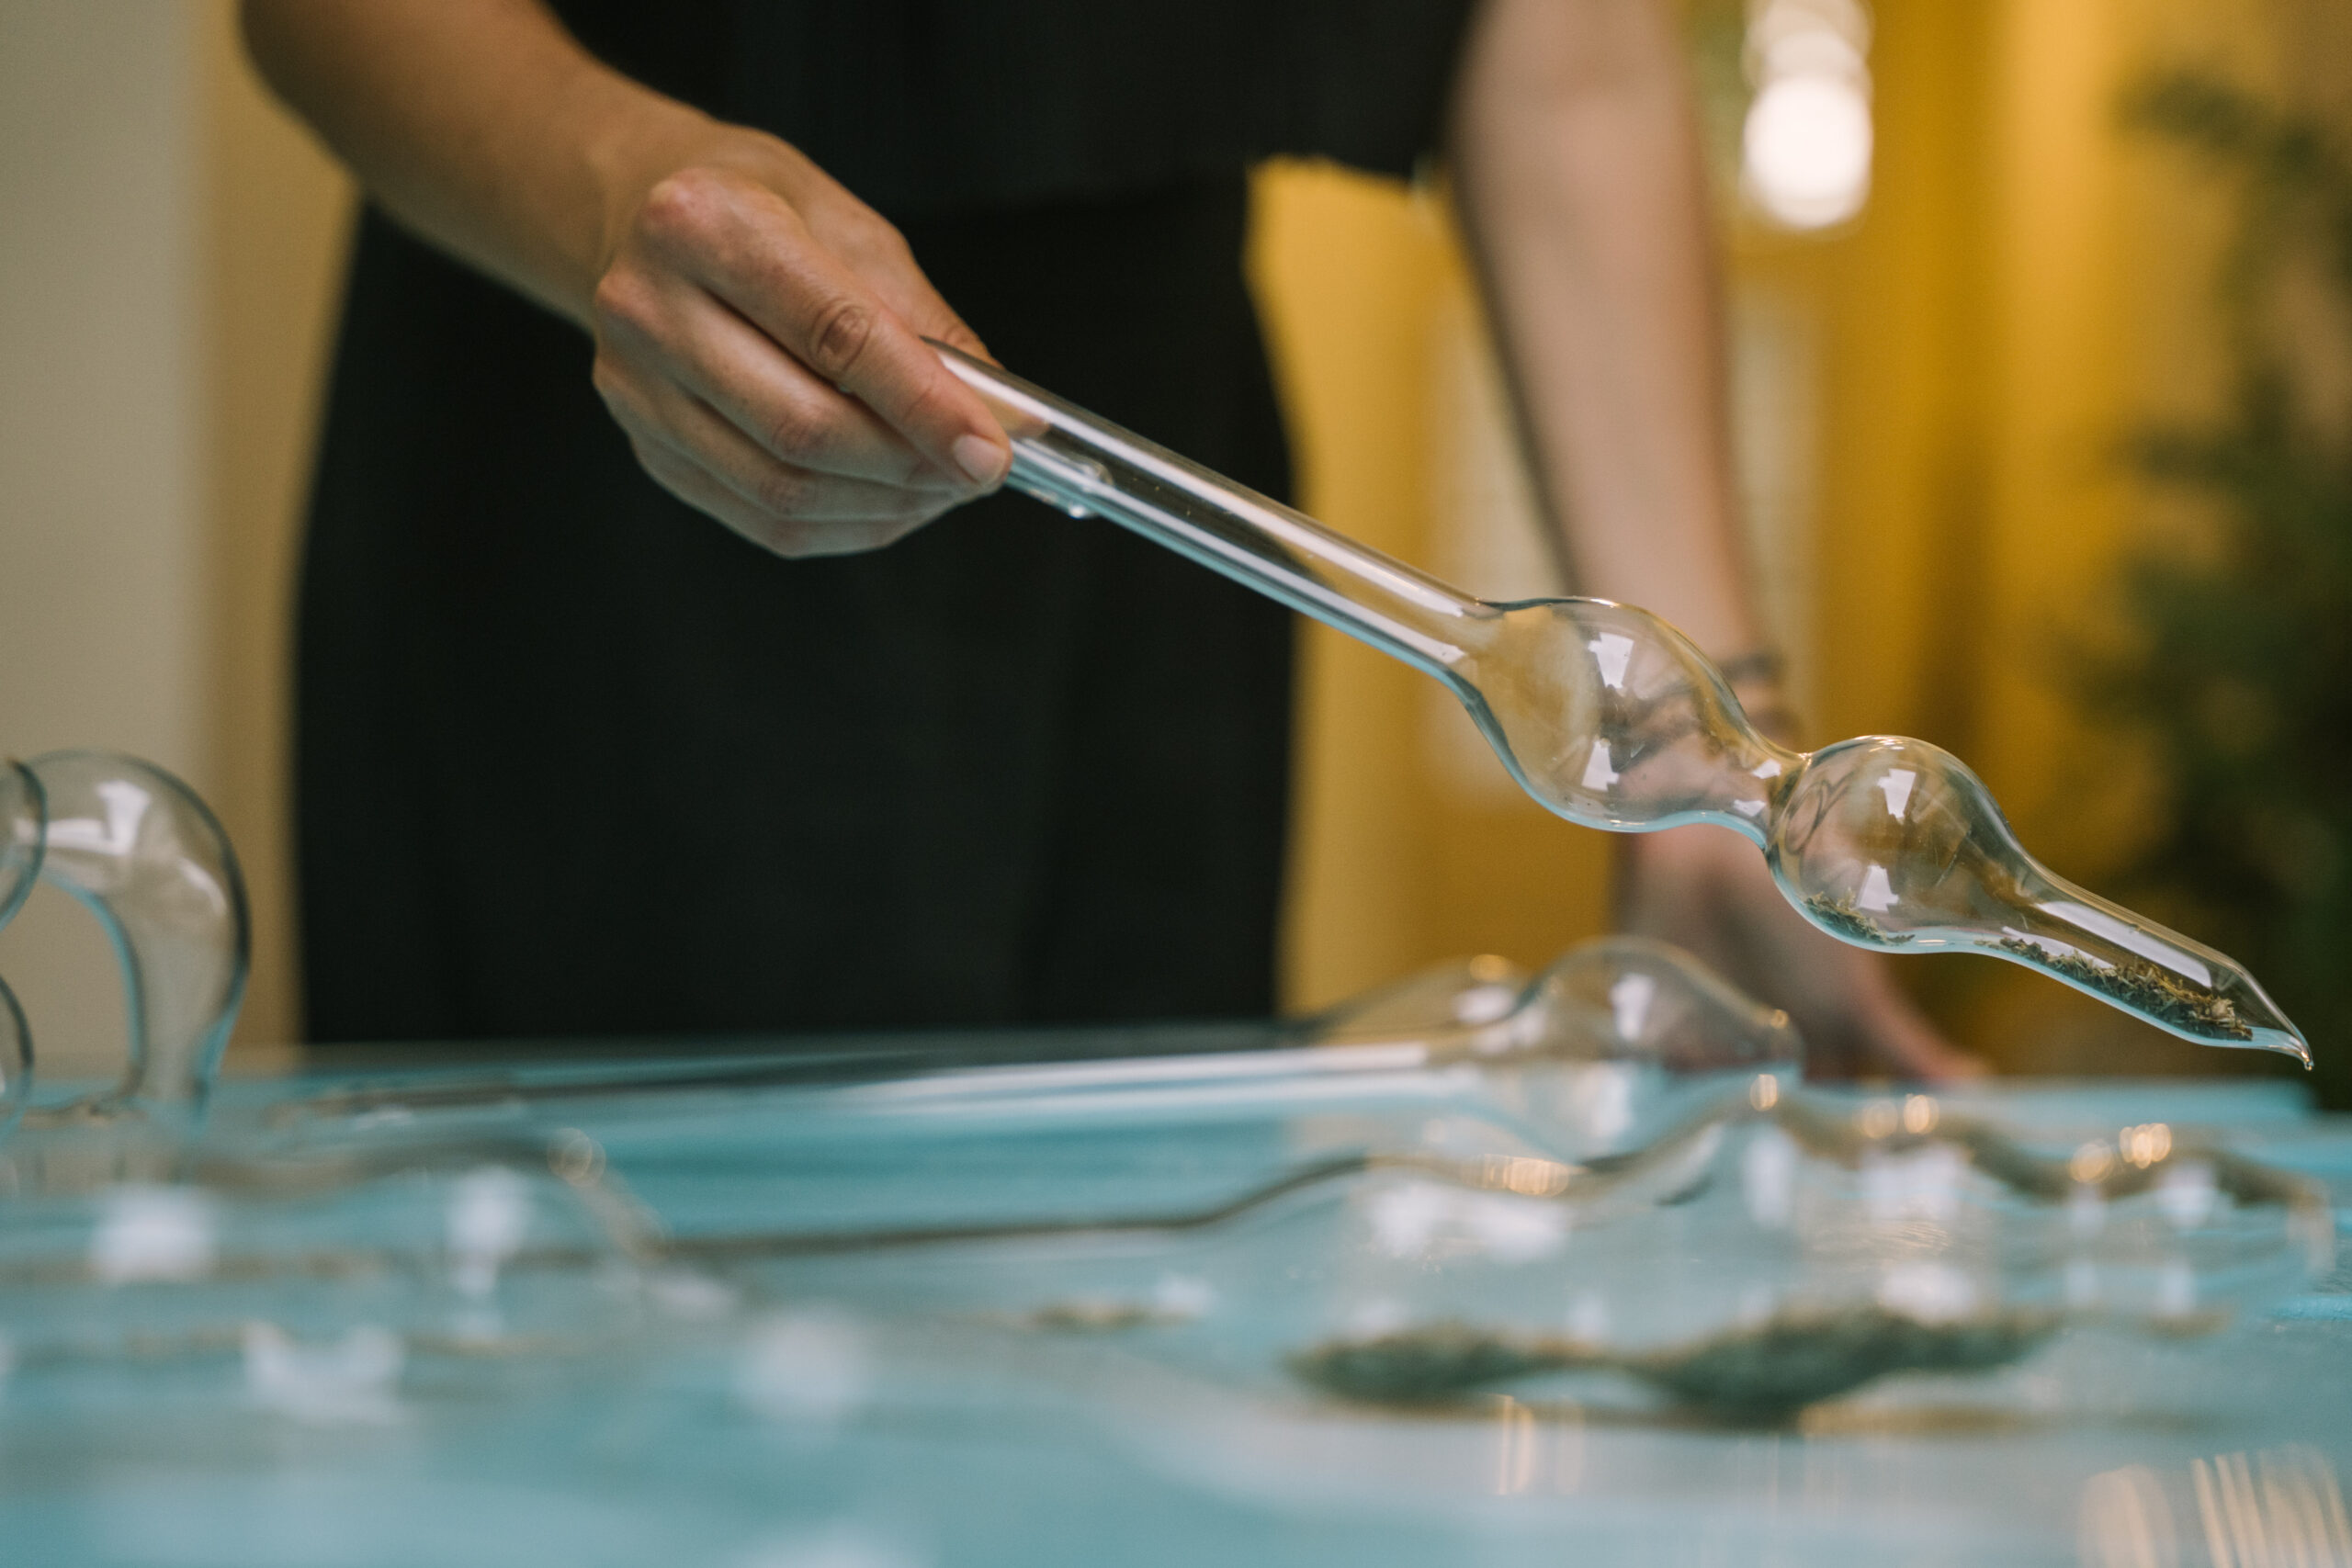 A rounded glass pipette with two bulbs is being used to diffuse scent on a turquoise table.